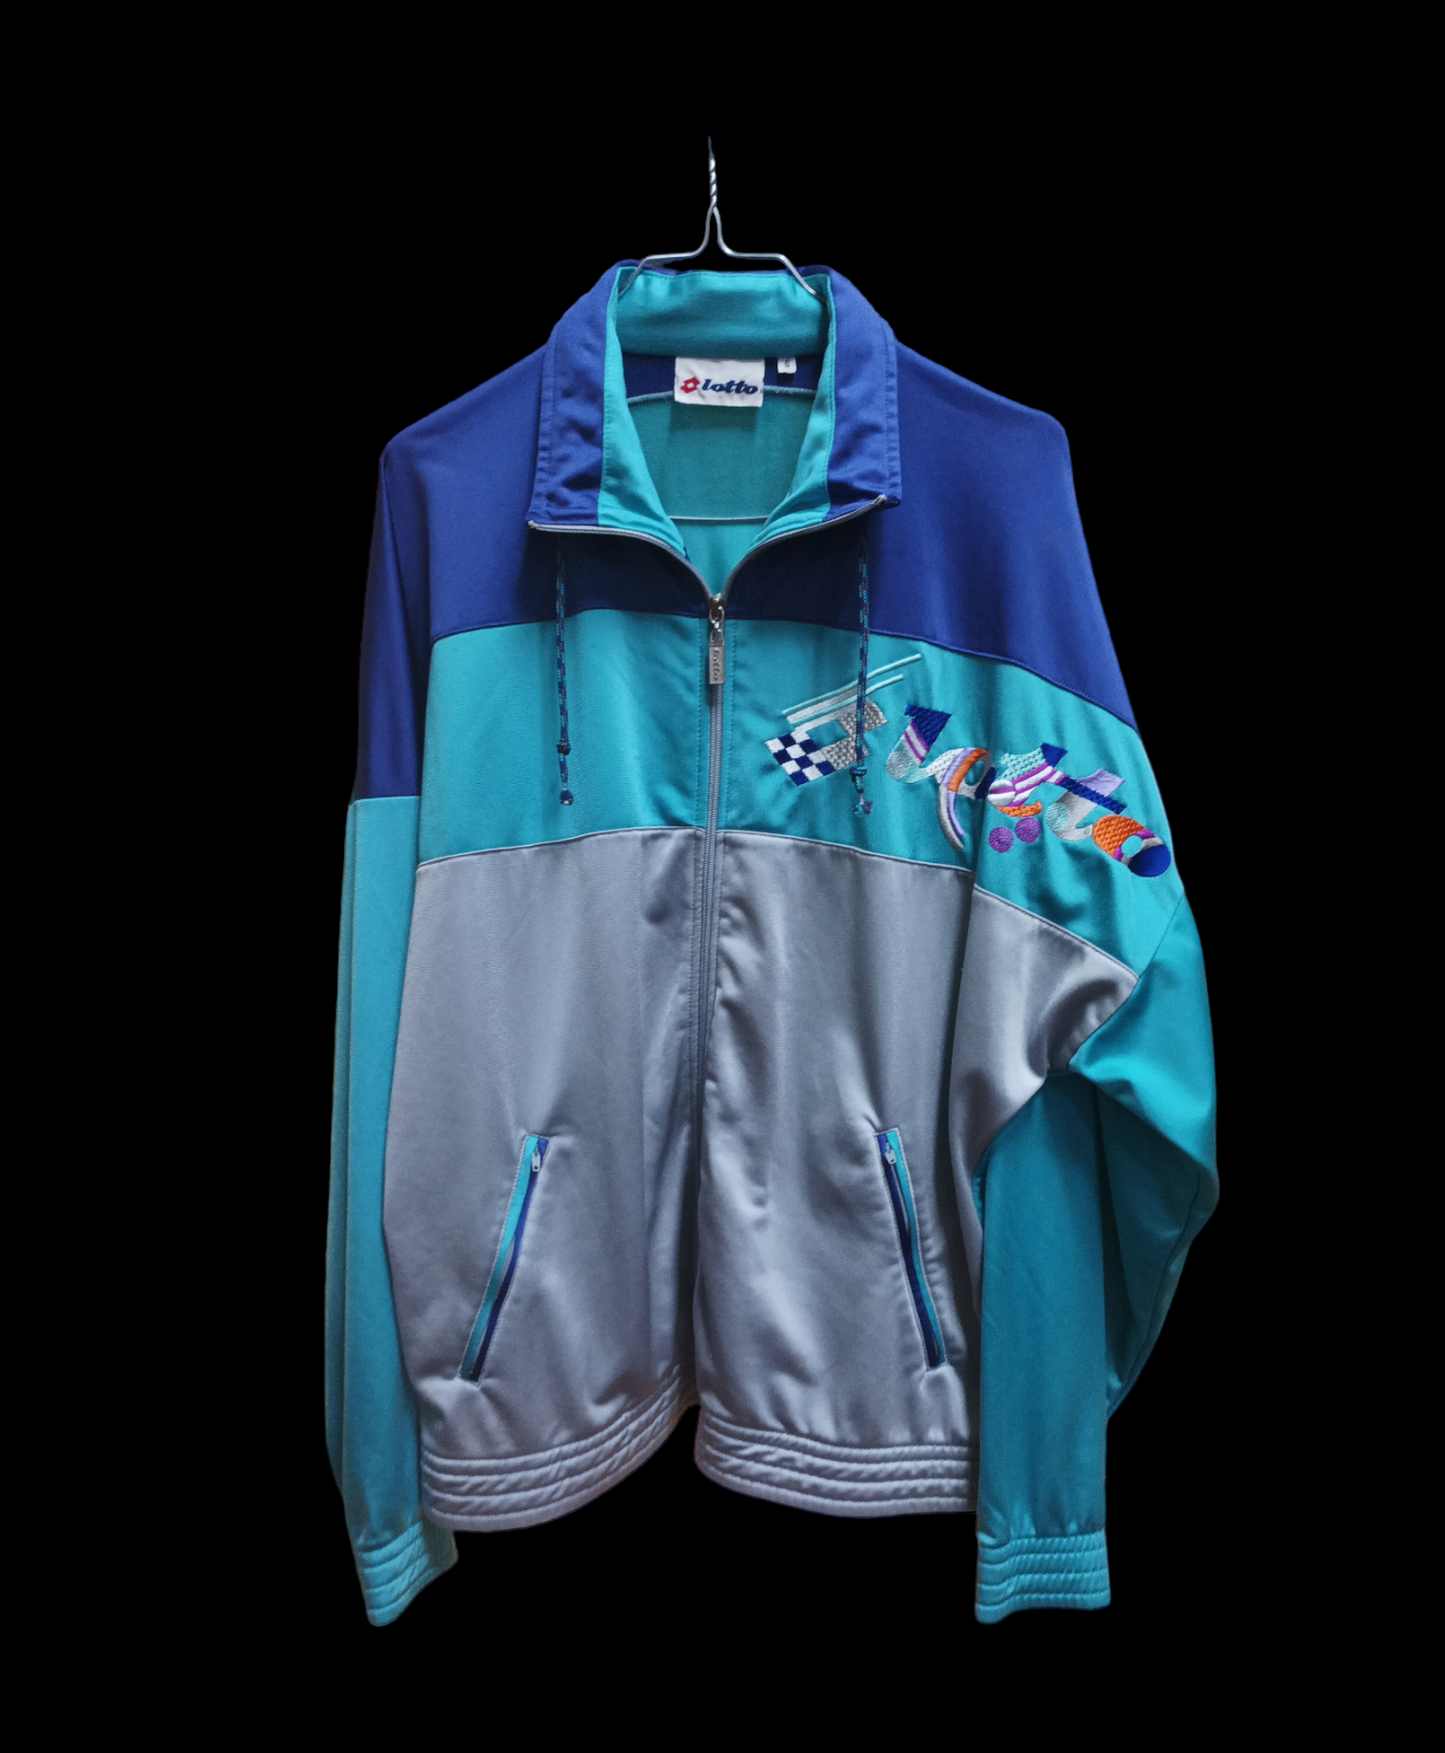 Track Suit Lotto